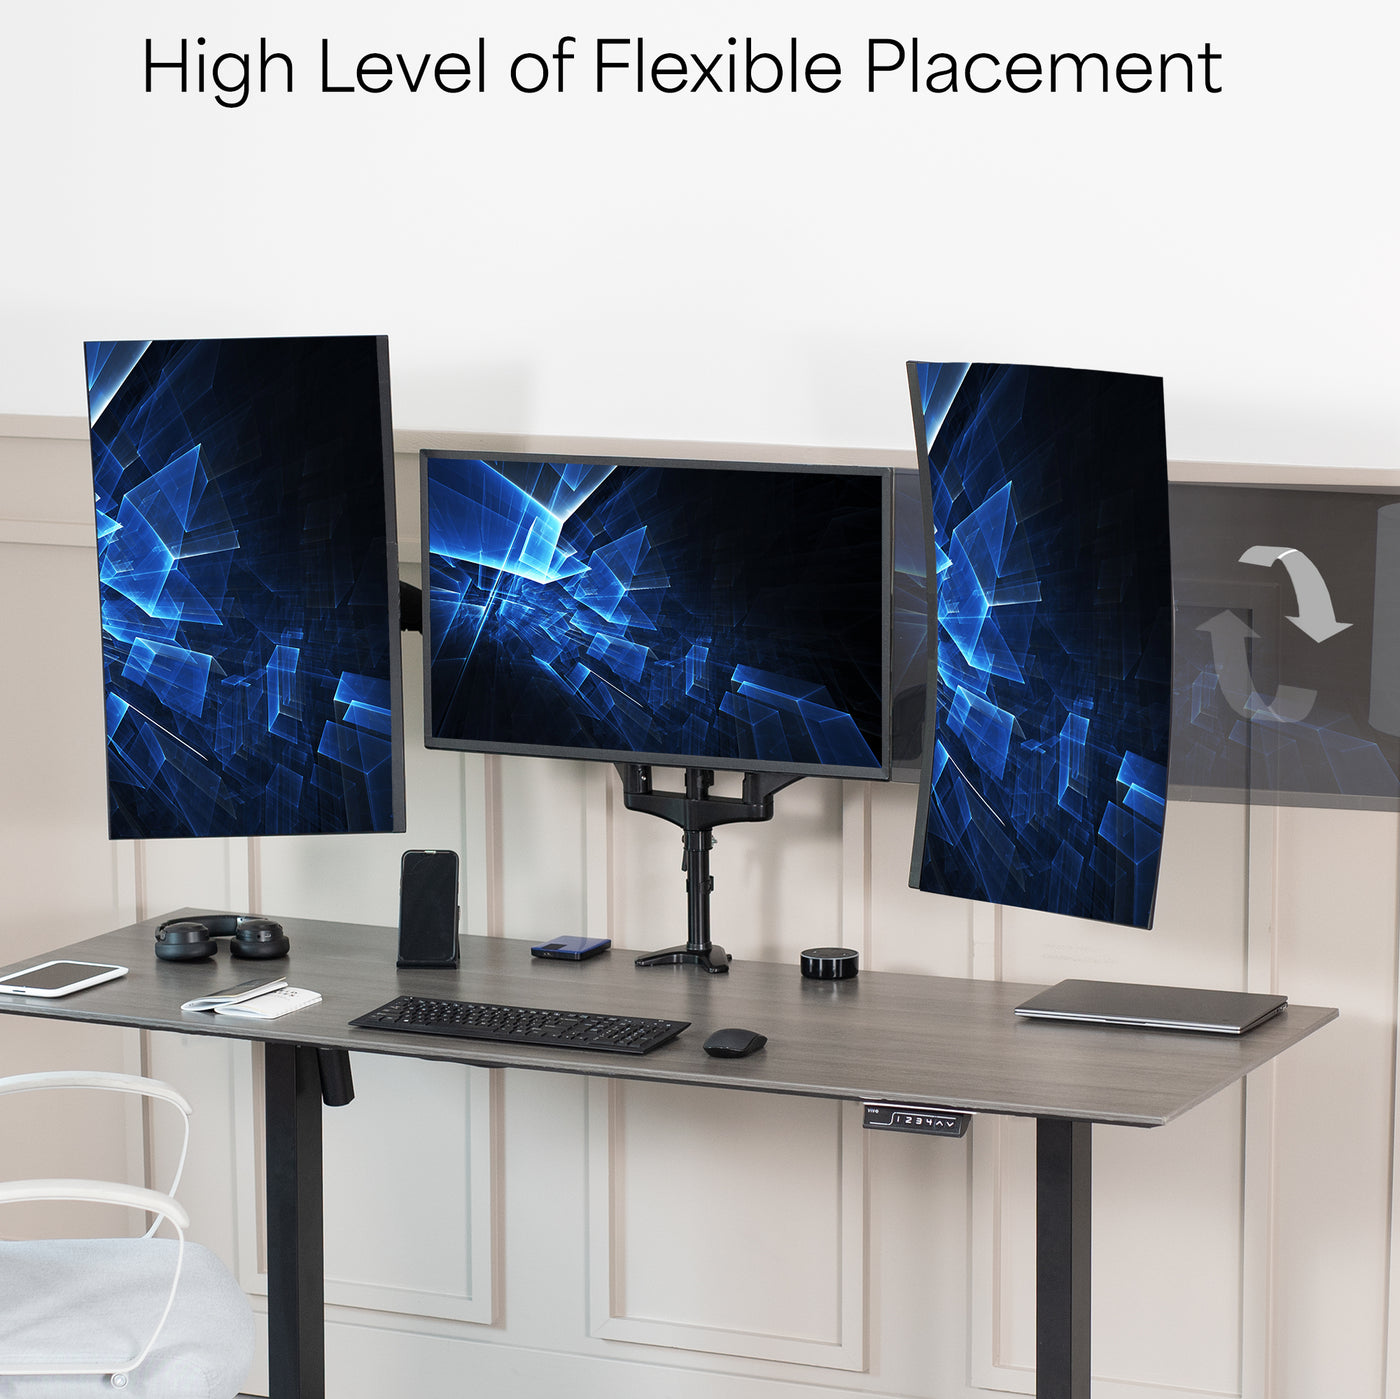 Triple Monitor Height Adjustable Desk Mount, 2 Pneumatic Arms, 1 Fixed, Counterbalance Stand